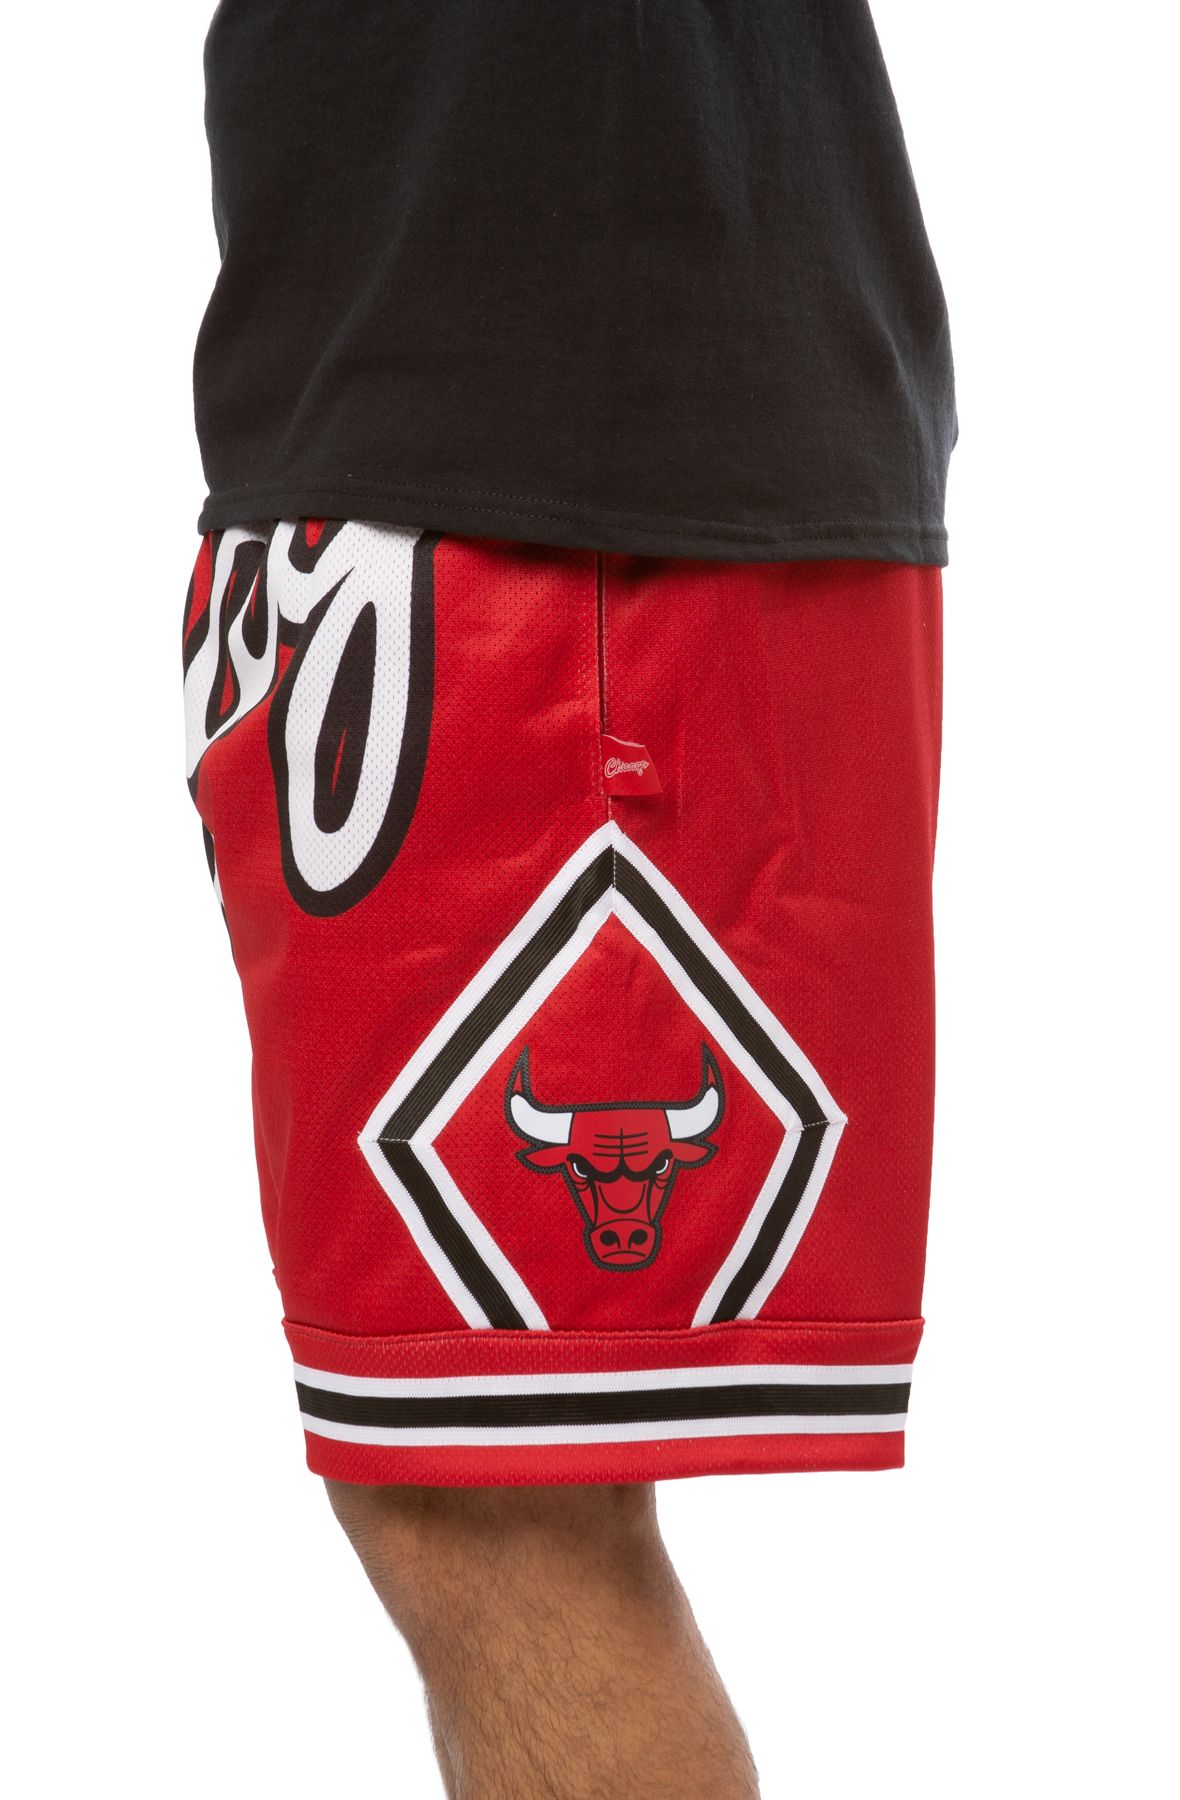 Mitchell & Ness Men's Chicago Bulls Big Face Shorts, Small, Red